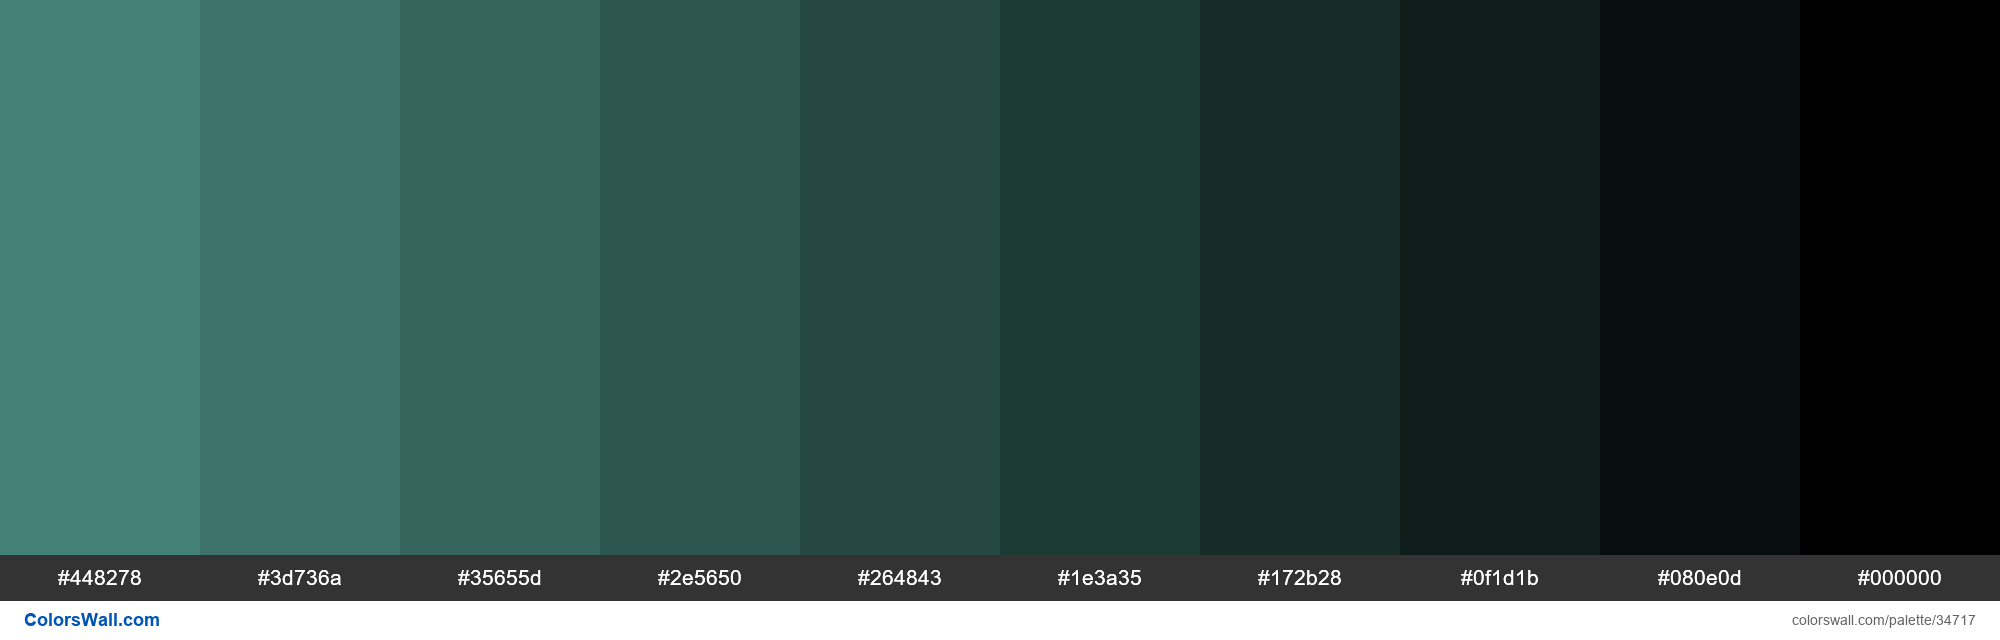 https://colorswall.com/images/palettes/shades-xkcd-color-dusty-teal-4c9085-hex-34717-colorswall.png